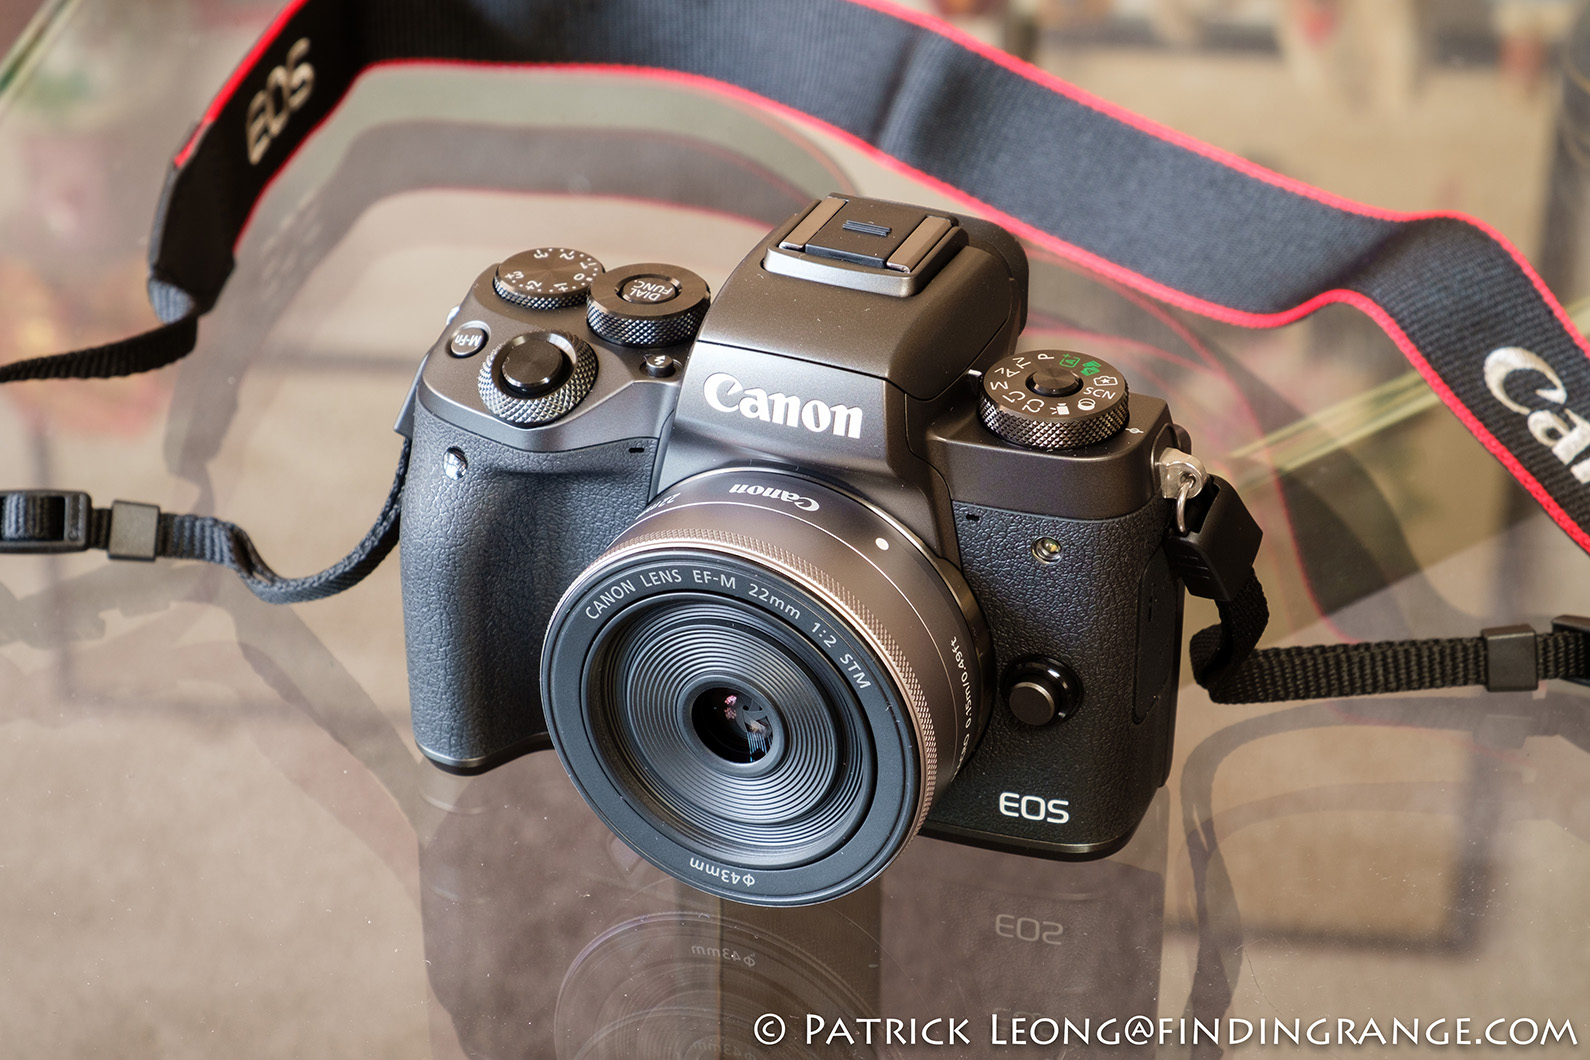 Canon EOS M5 Mirrorless Digital Camera Up For Review Soon